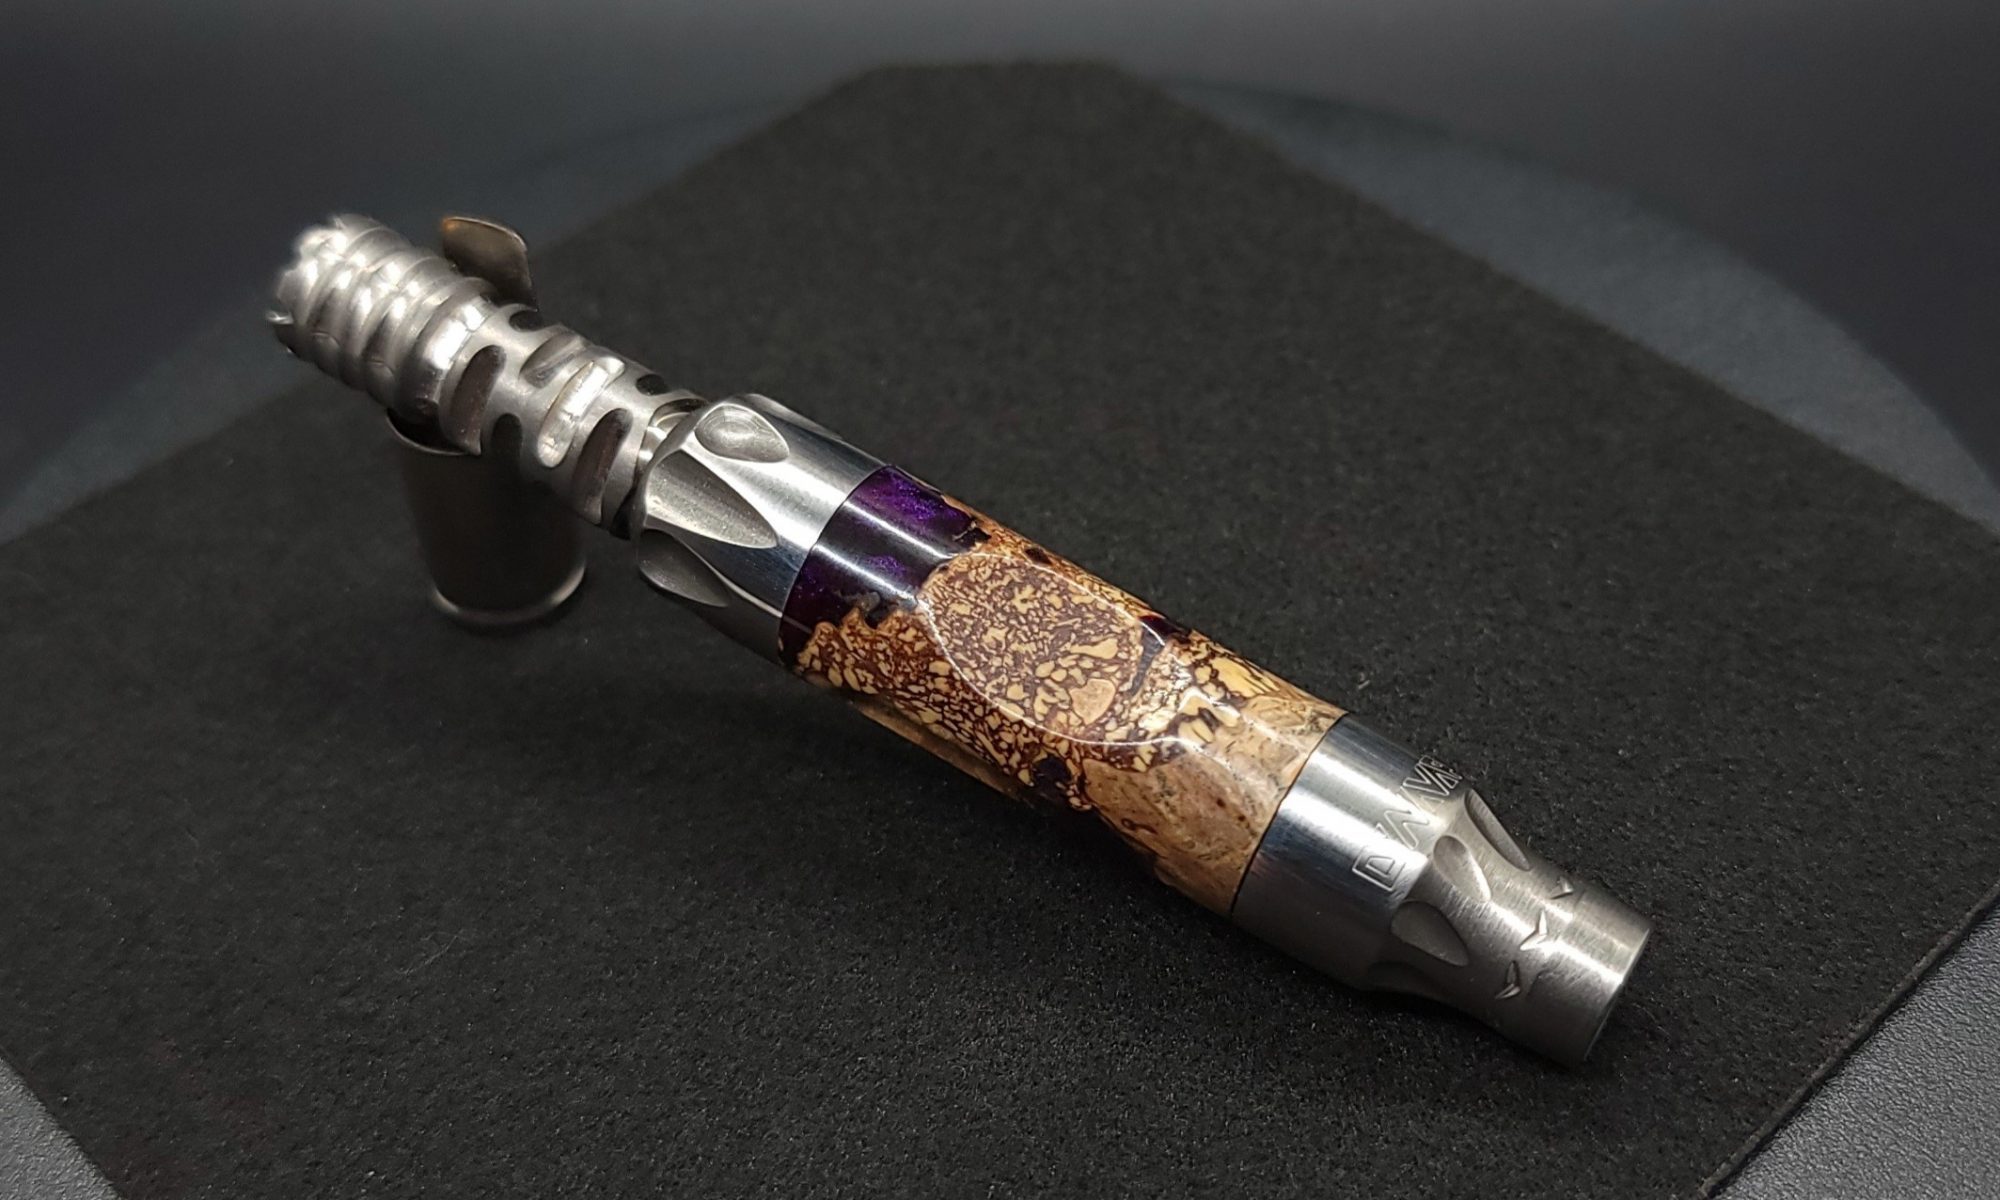 This image portrays Vong(i) Custom Sleeve-Black Walnut Burl Hybrid by Dovetail Woodwork.